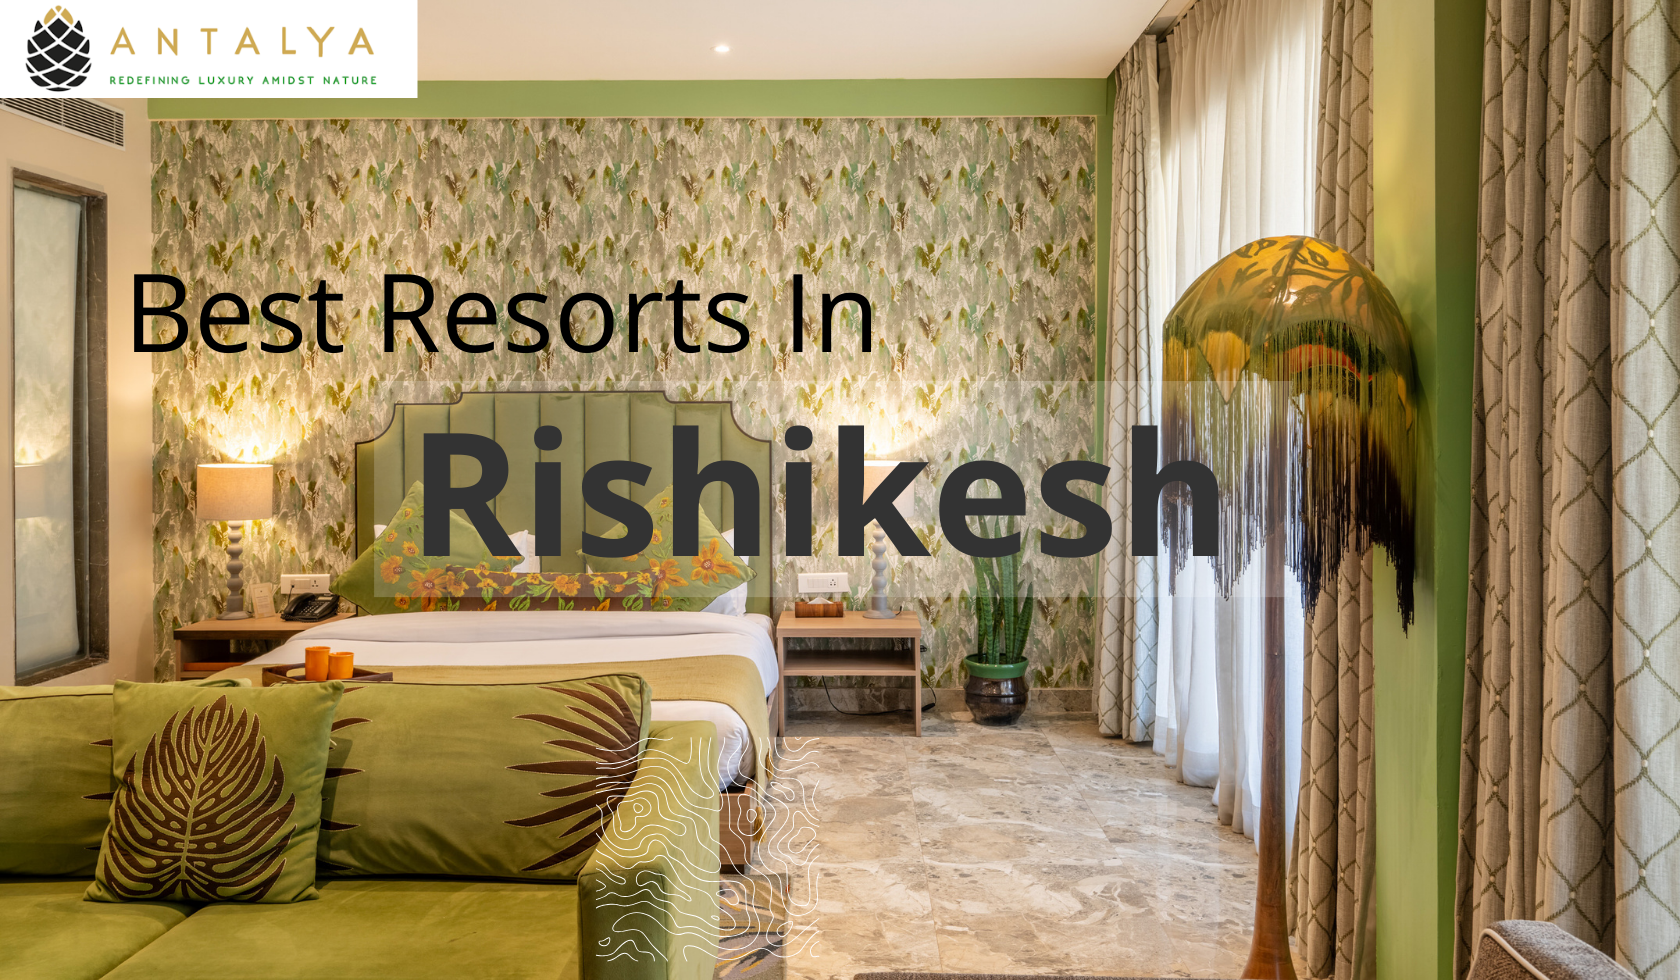 ARE YOU LOOKING FOR A LUXURY RESORTS IN RISHIKESH? - Antalya Hotels